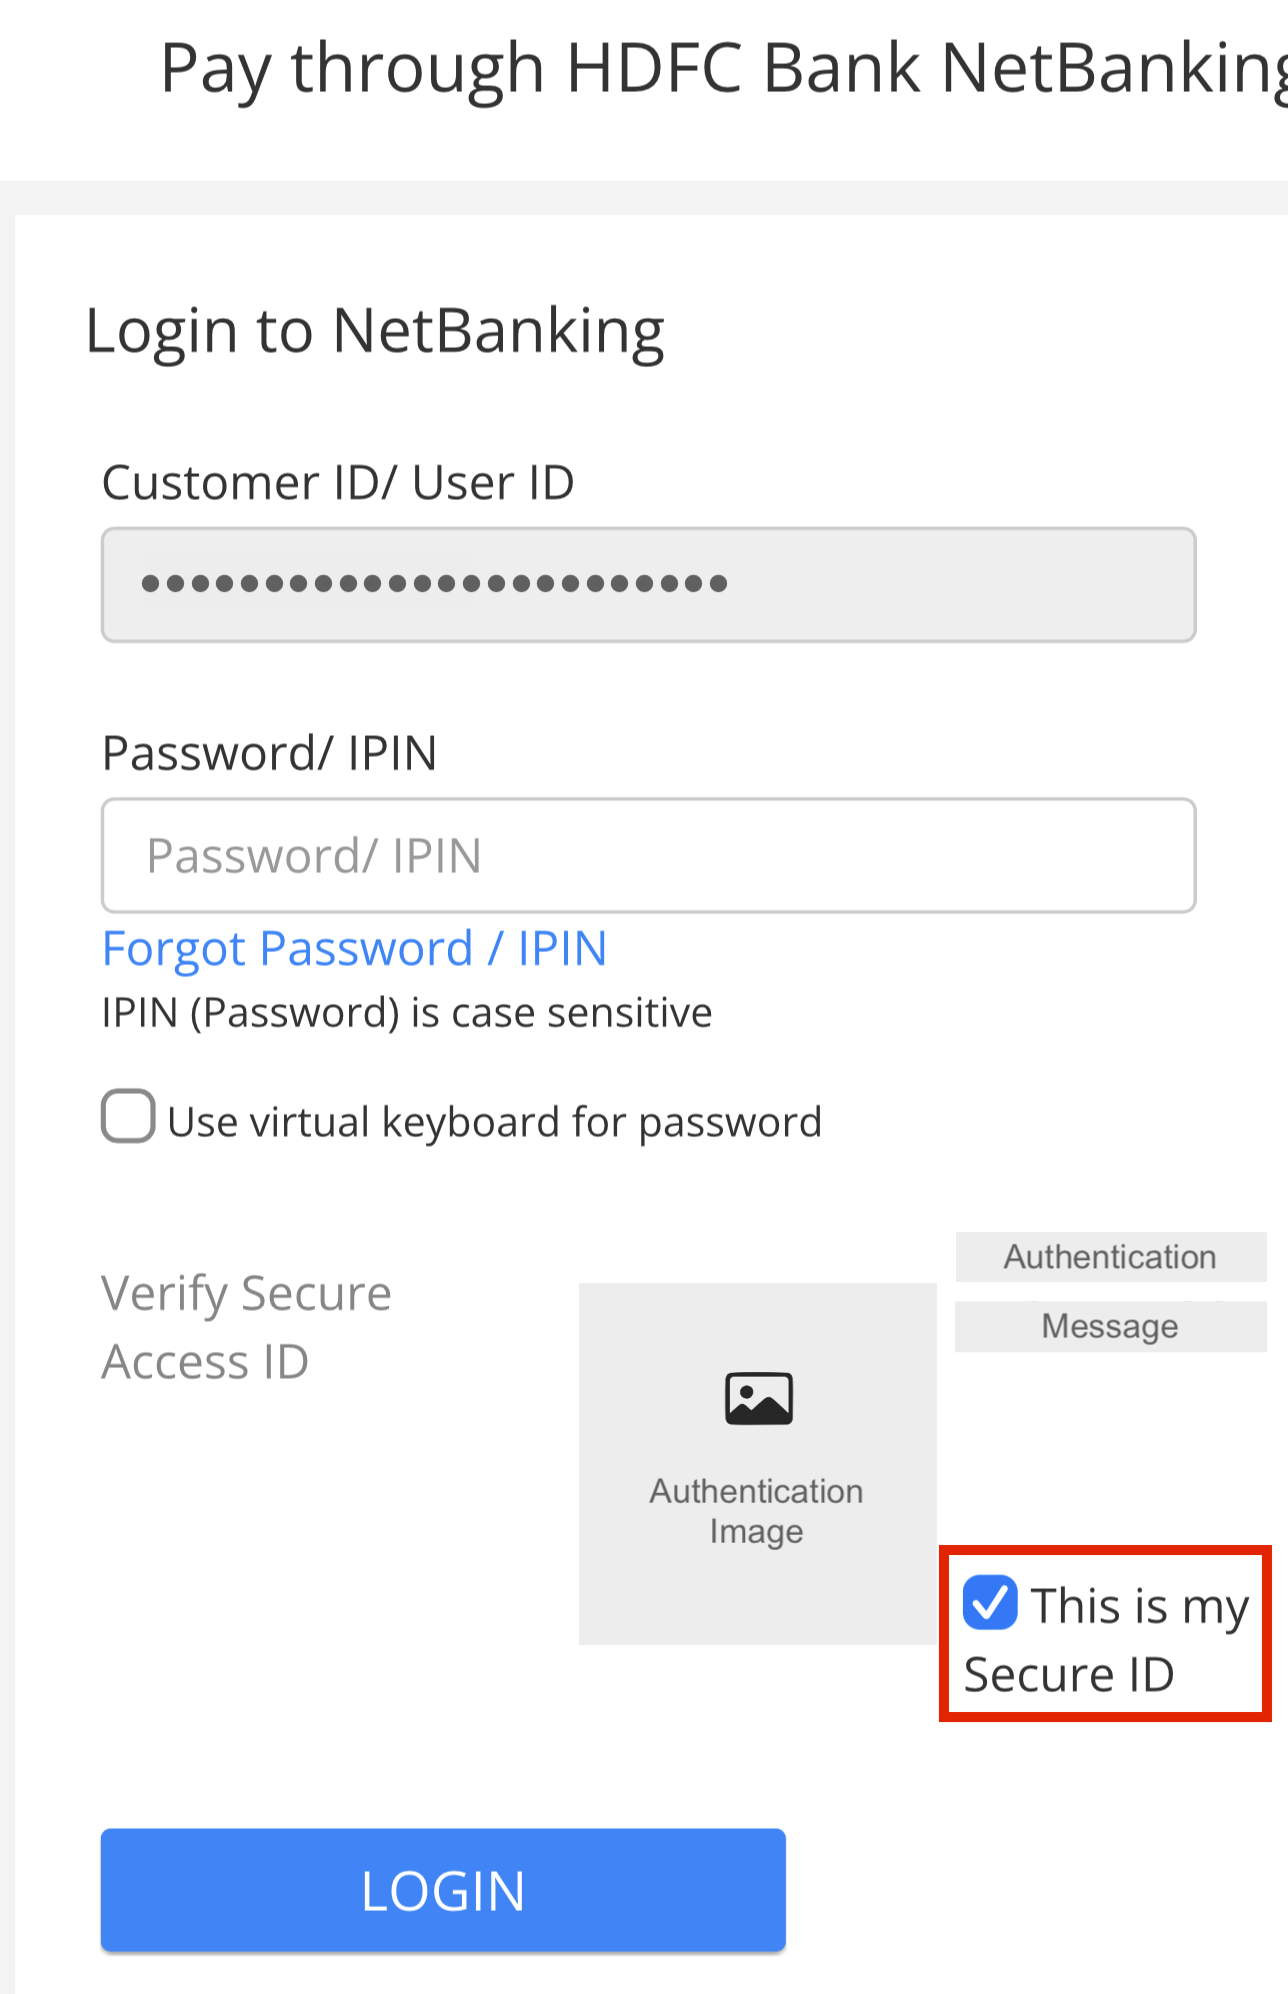 HDFC Bank login page when going through Juspay on Swiggy. The 'This is my Secure ID' checkbox is checked by default.